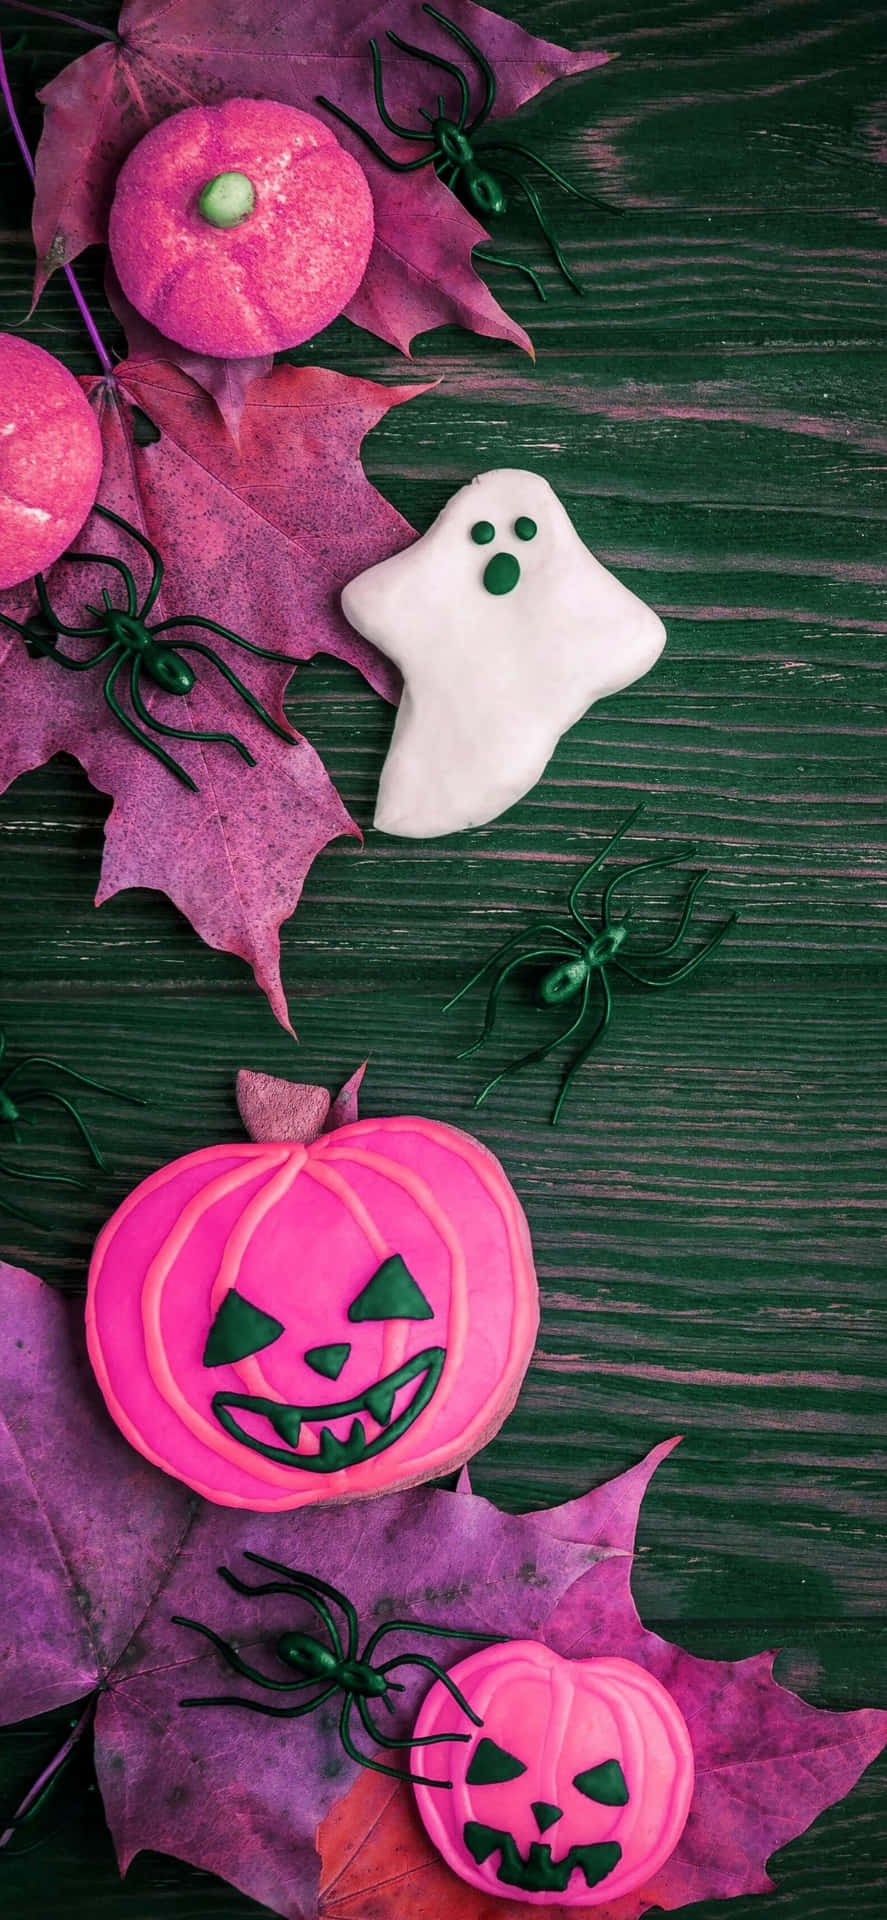 Halloween Cookies And Pumpkins On A Dark Wooden Table